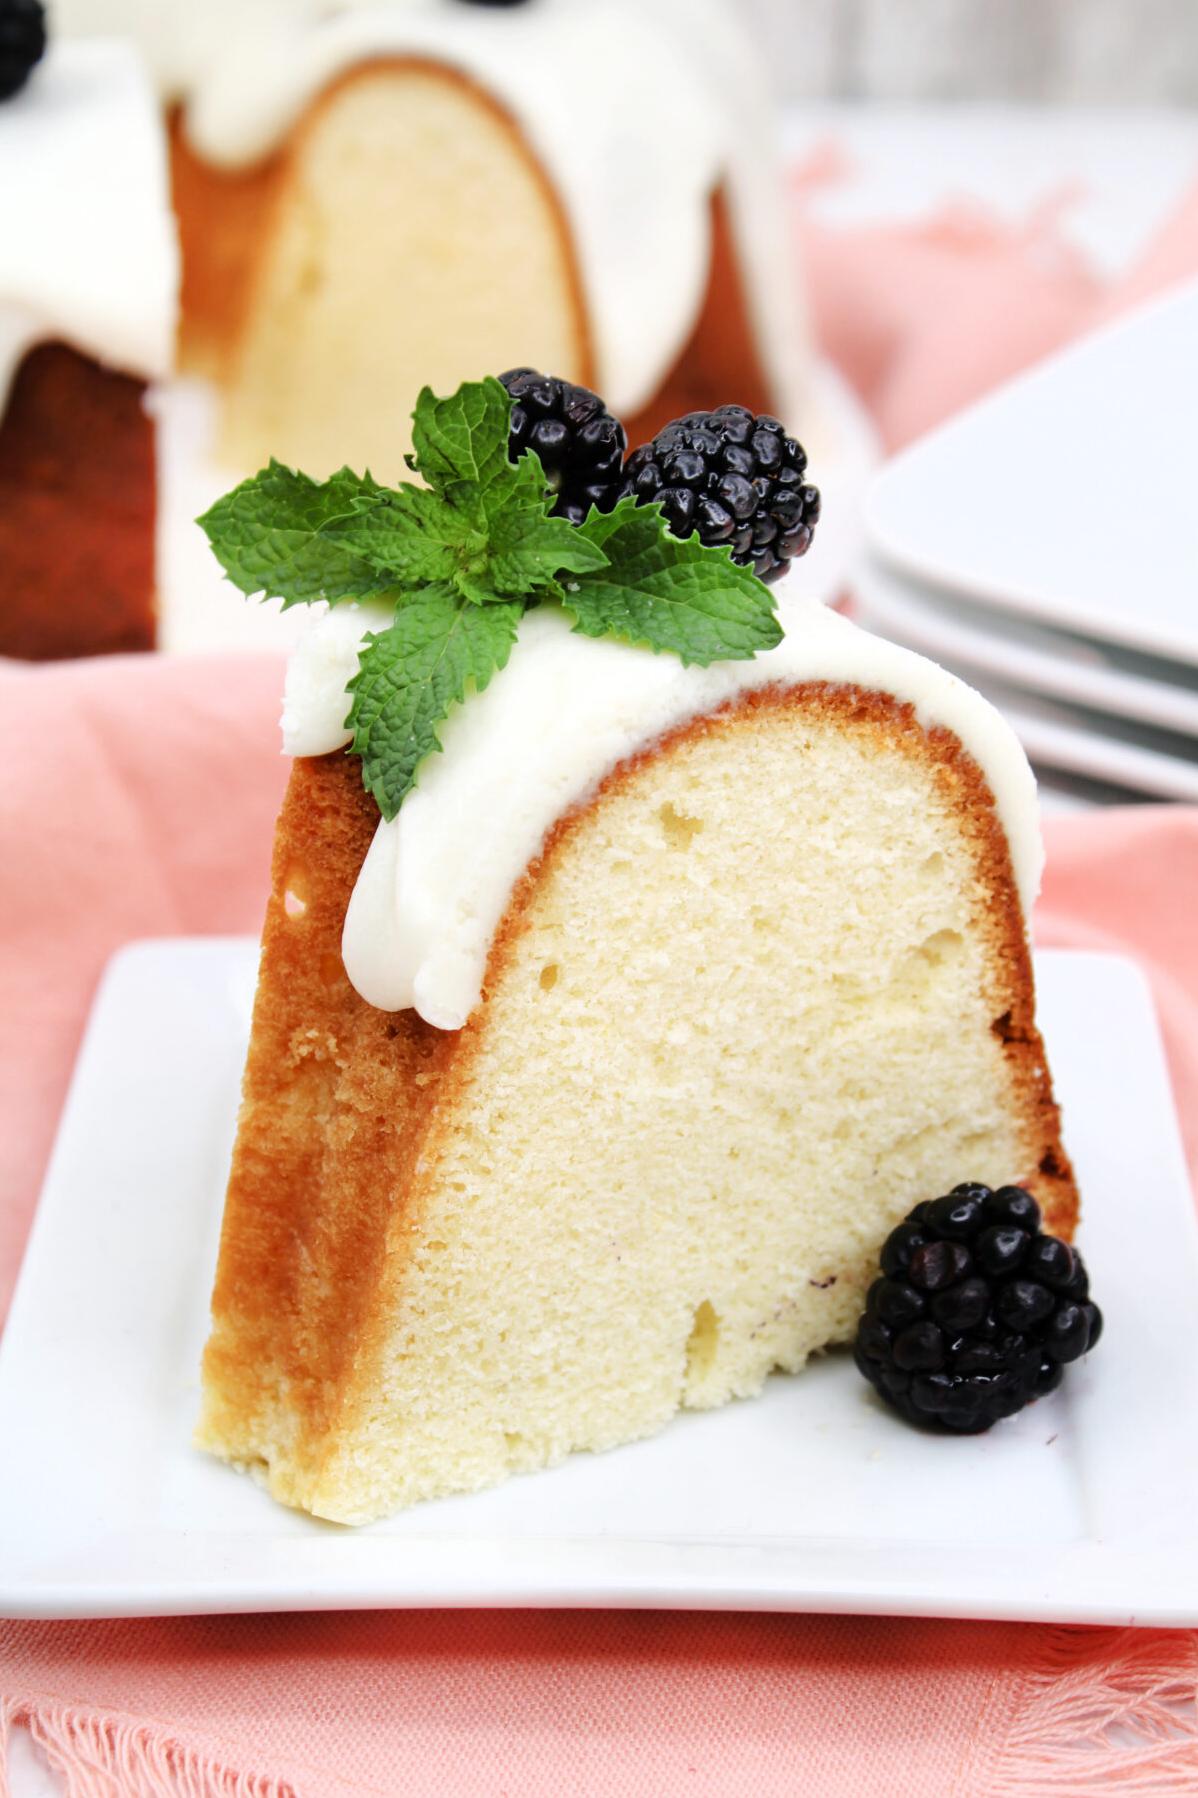  This easy-to-make cake is perfect for any occasion.